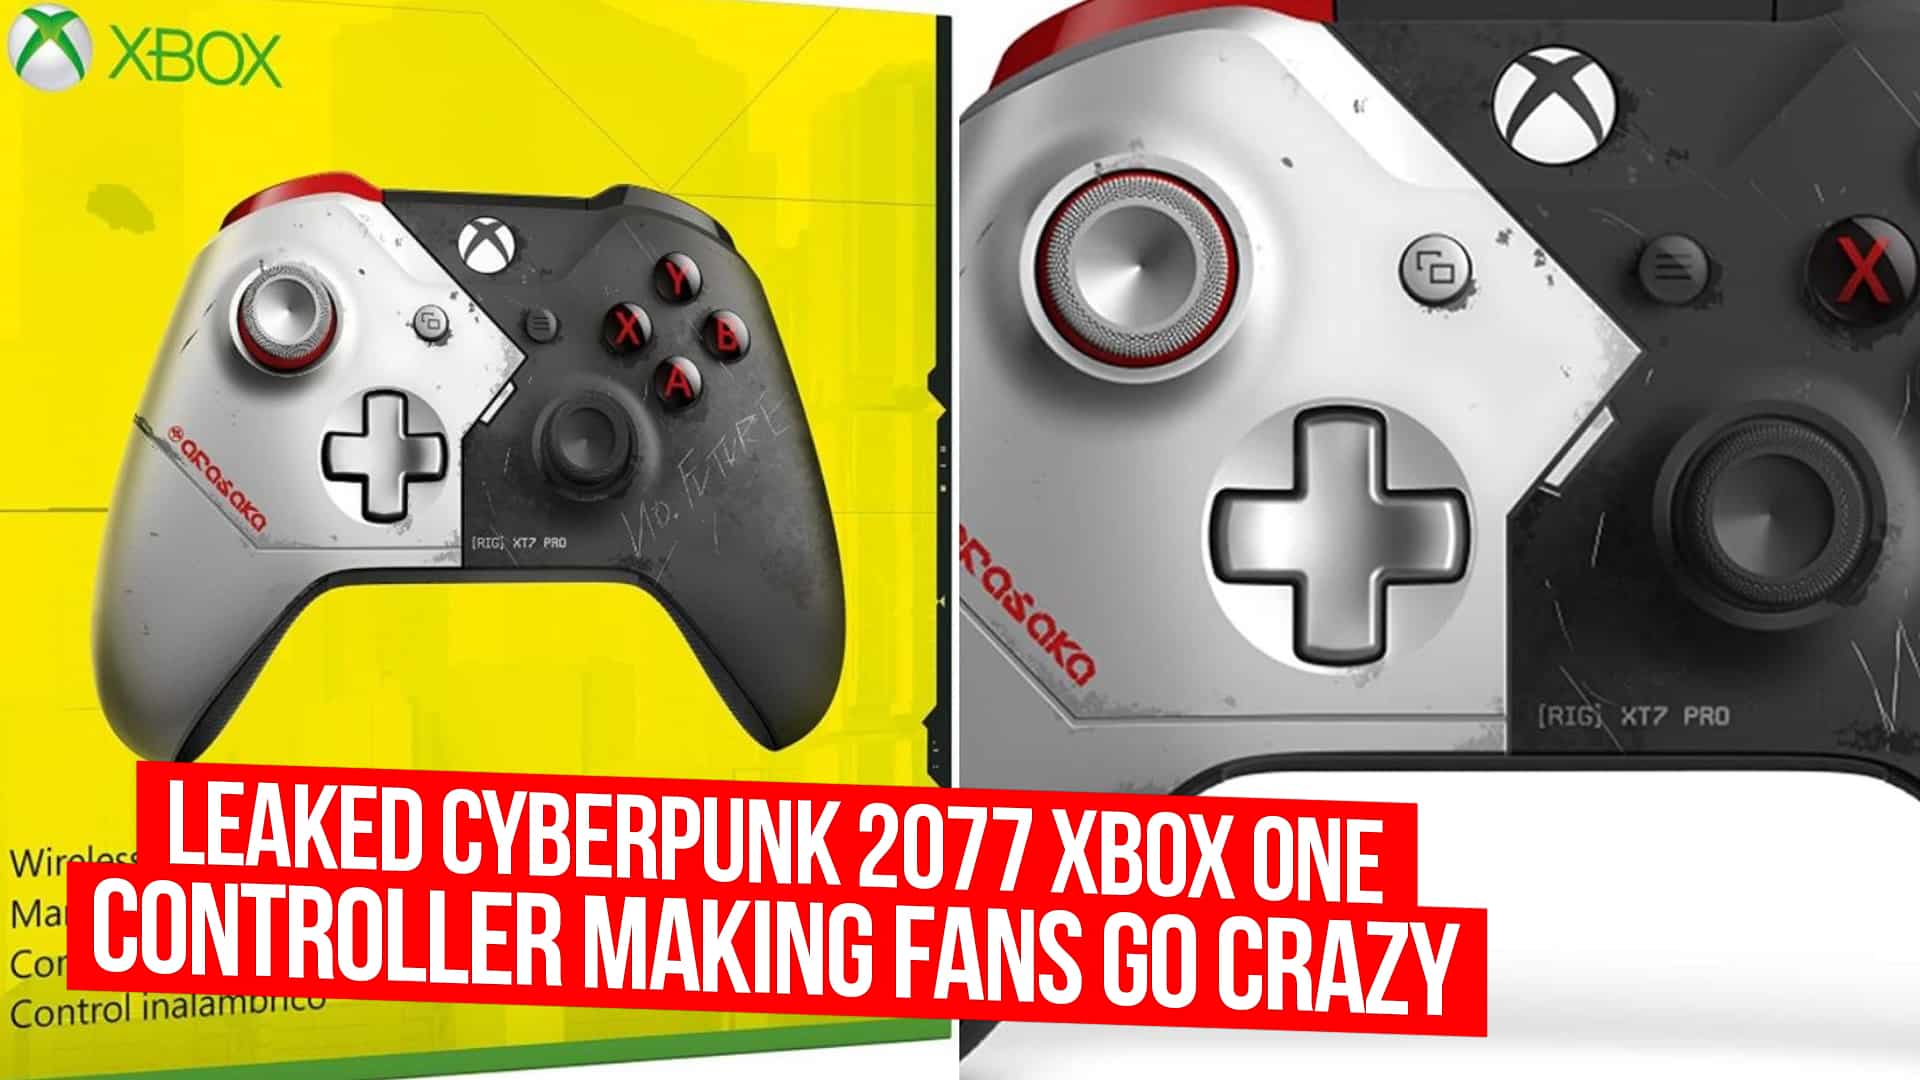 Leaked Cyberpunk 2077 Xbox One Controller Making Fans Go Crazy